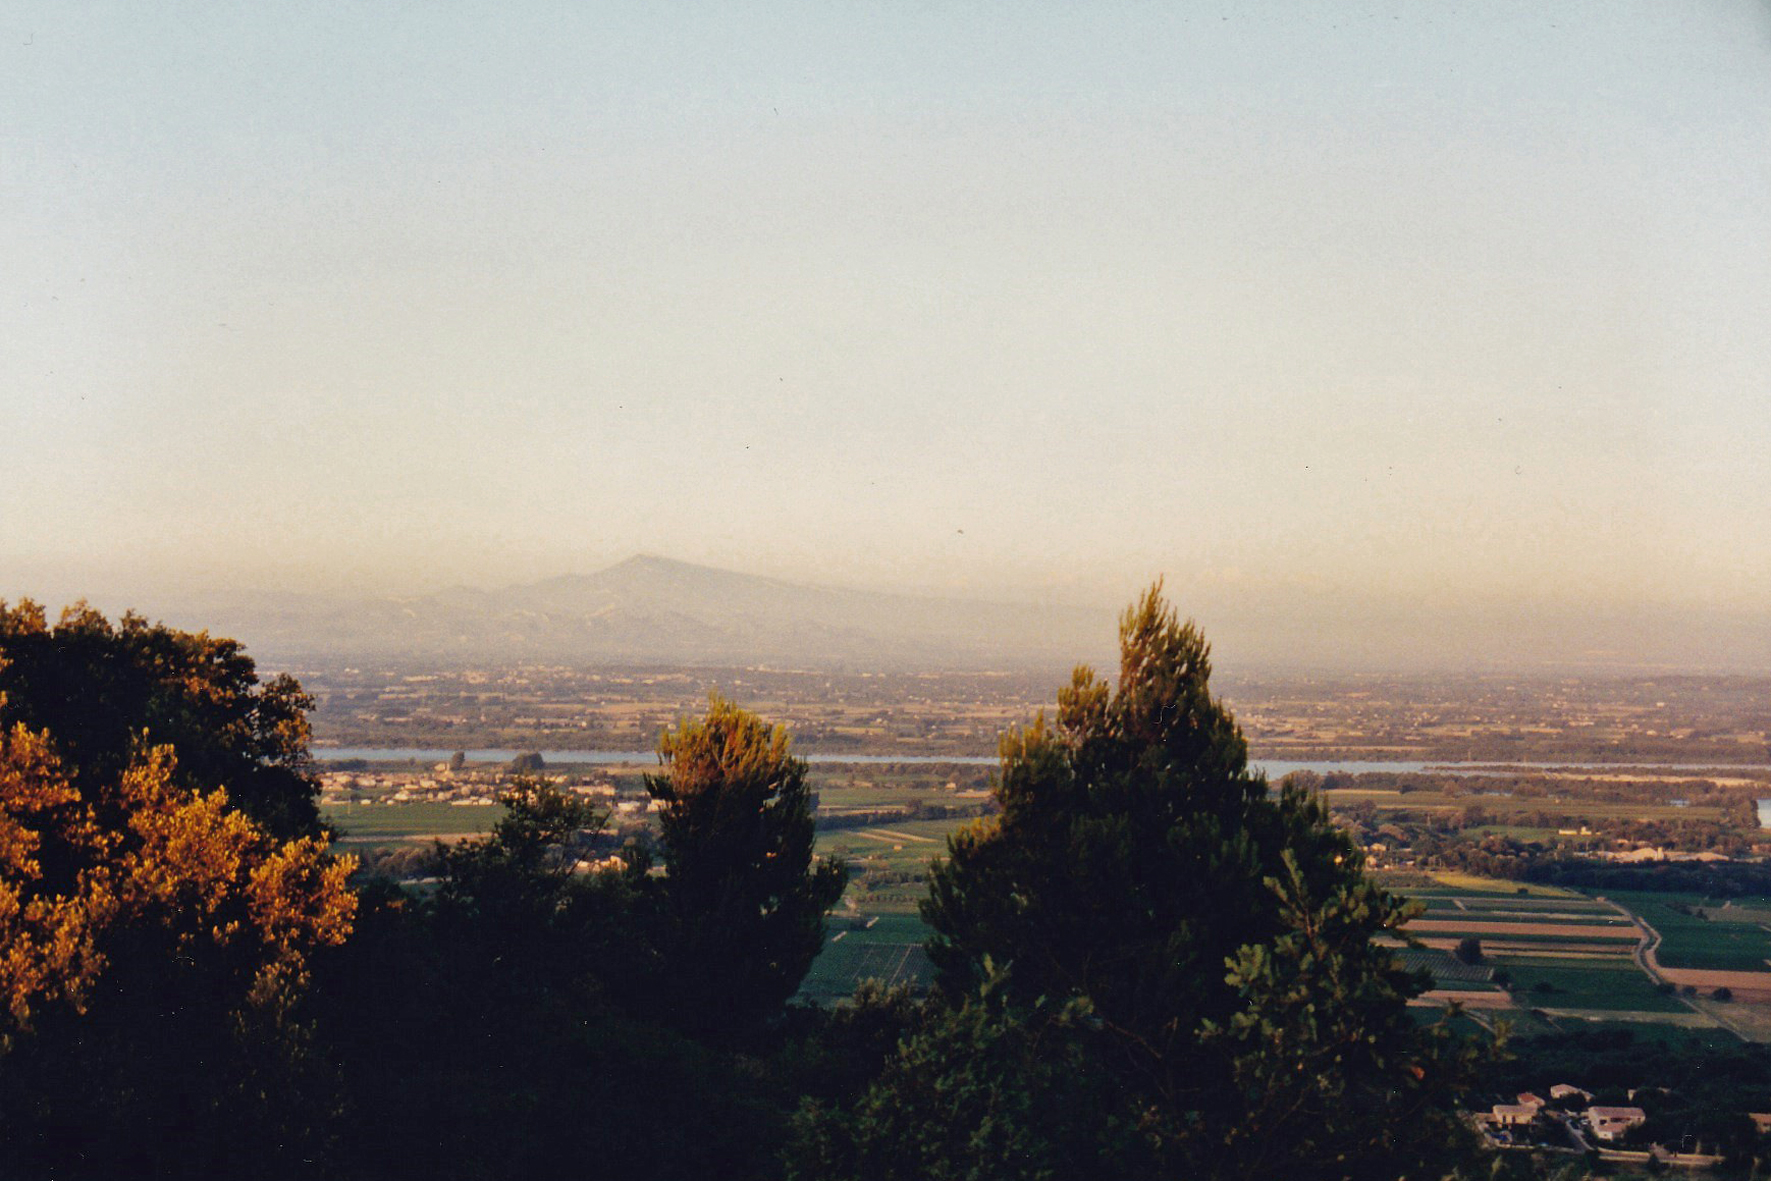 Mont Ventoux in the haze to the east, with the Rhone river below